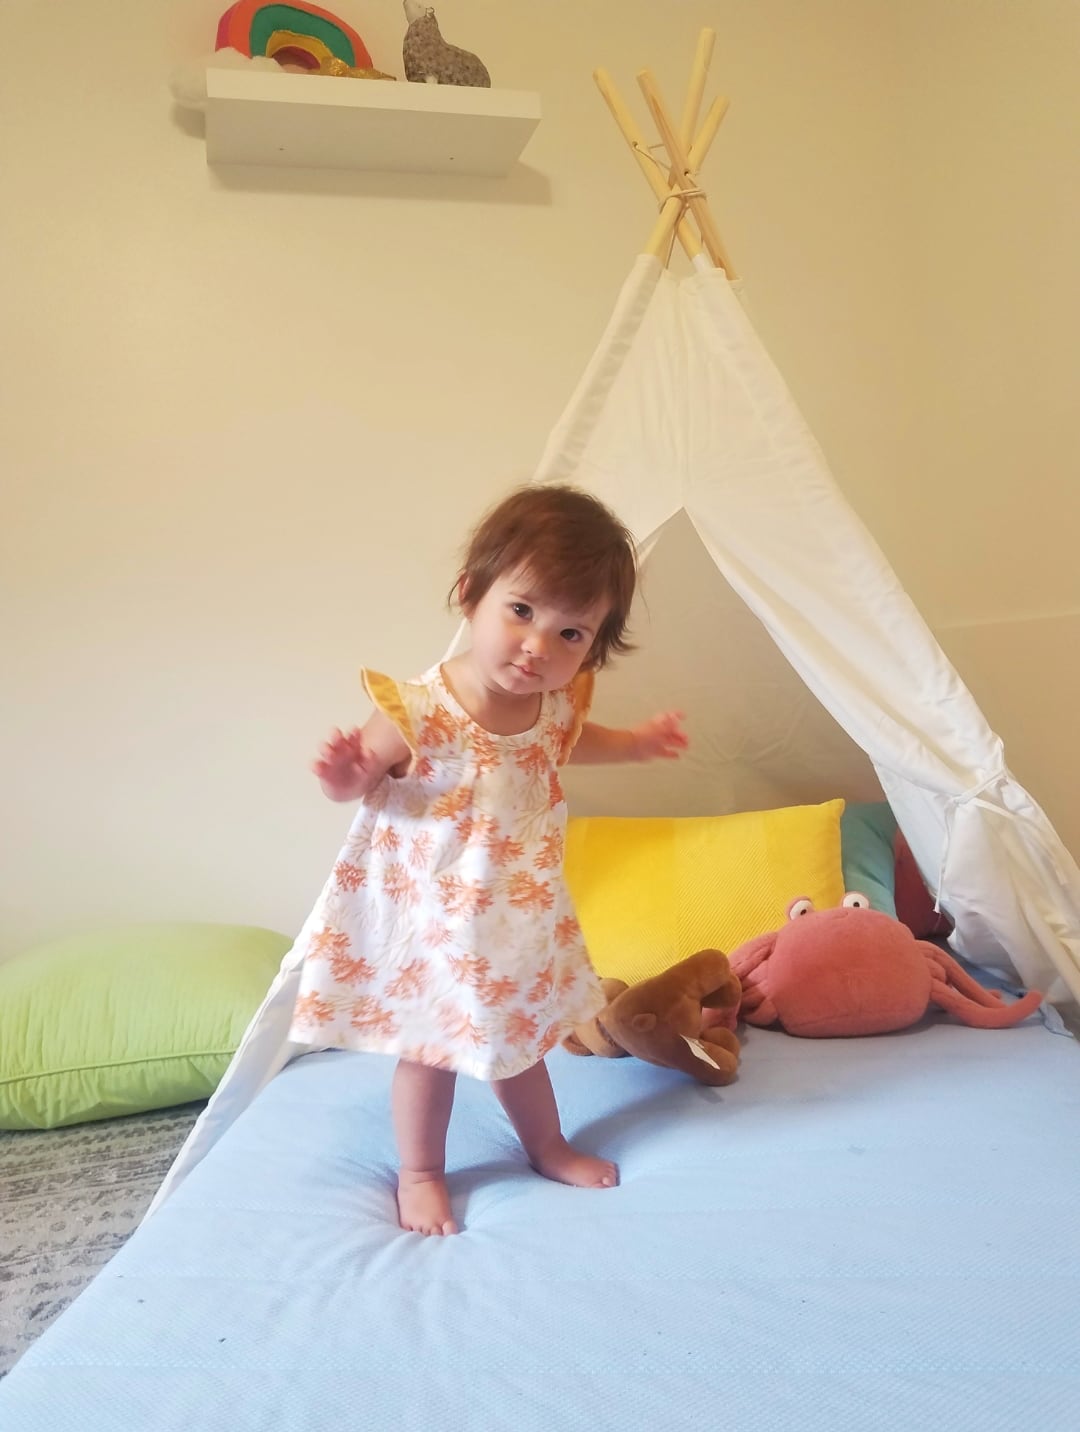 Ellis and her tent
